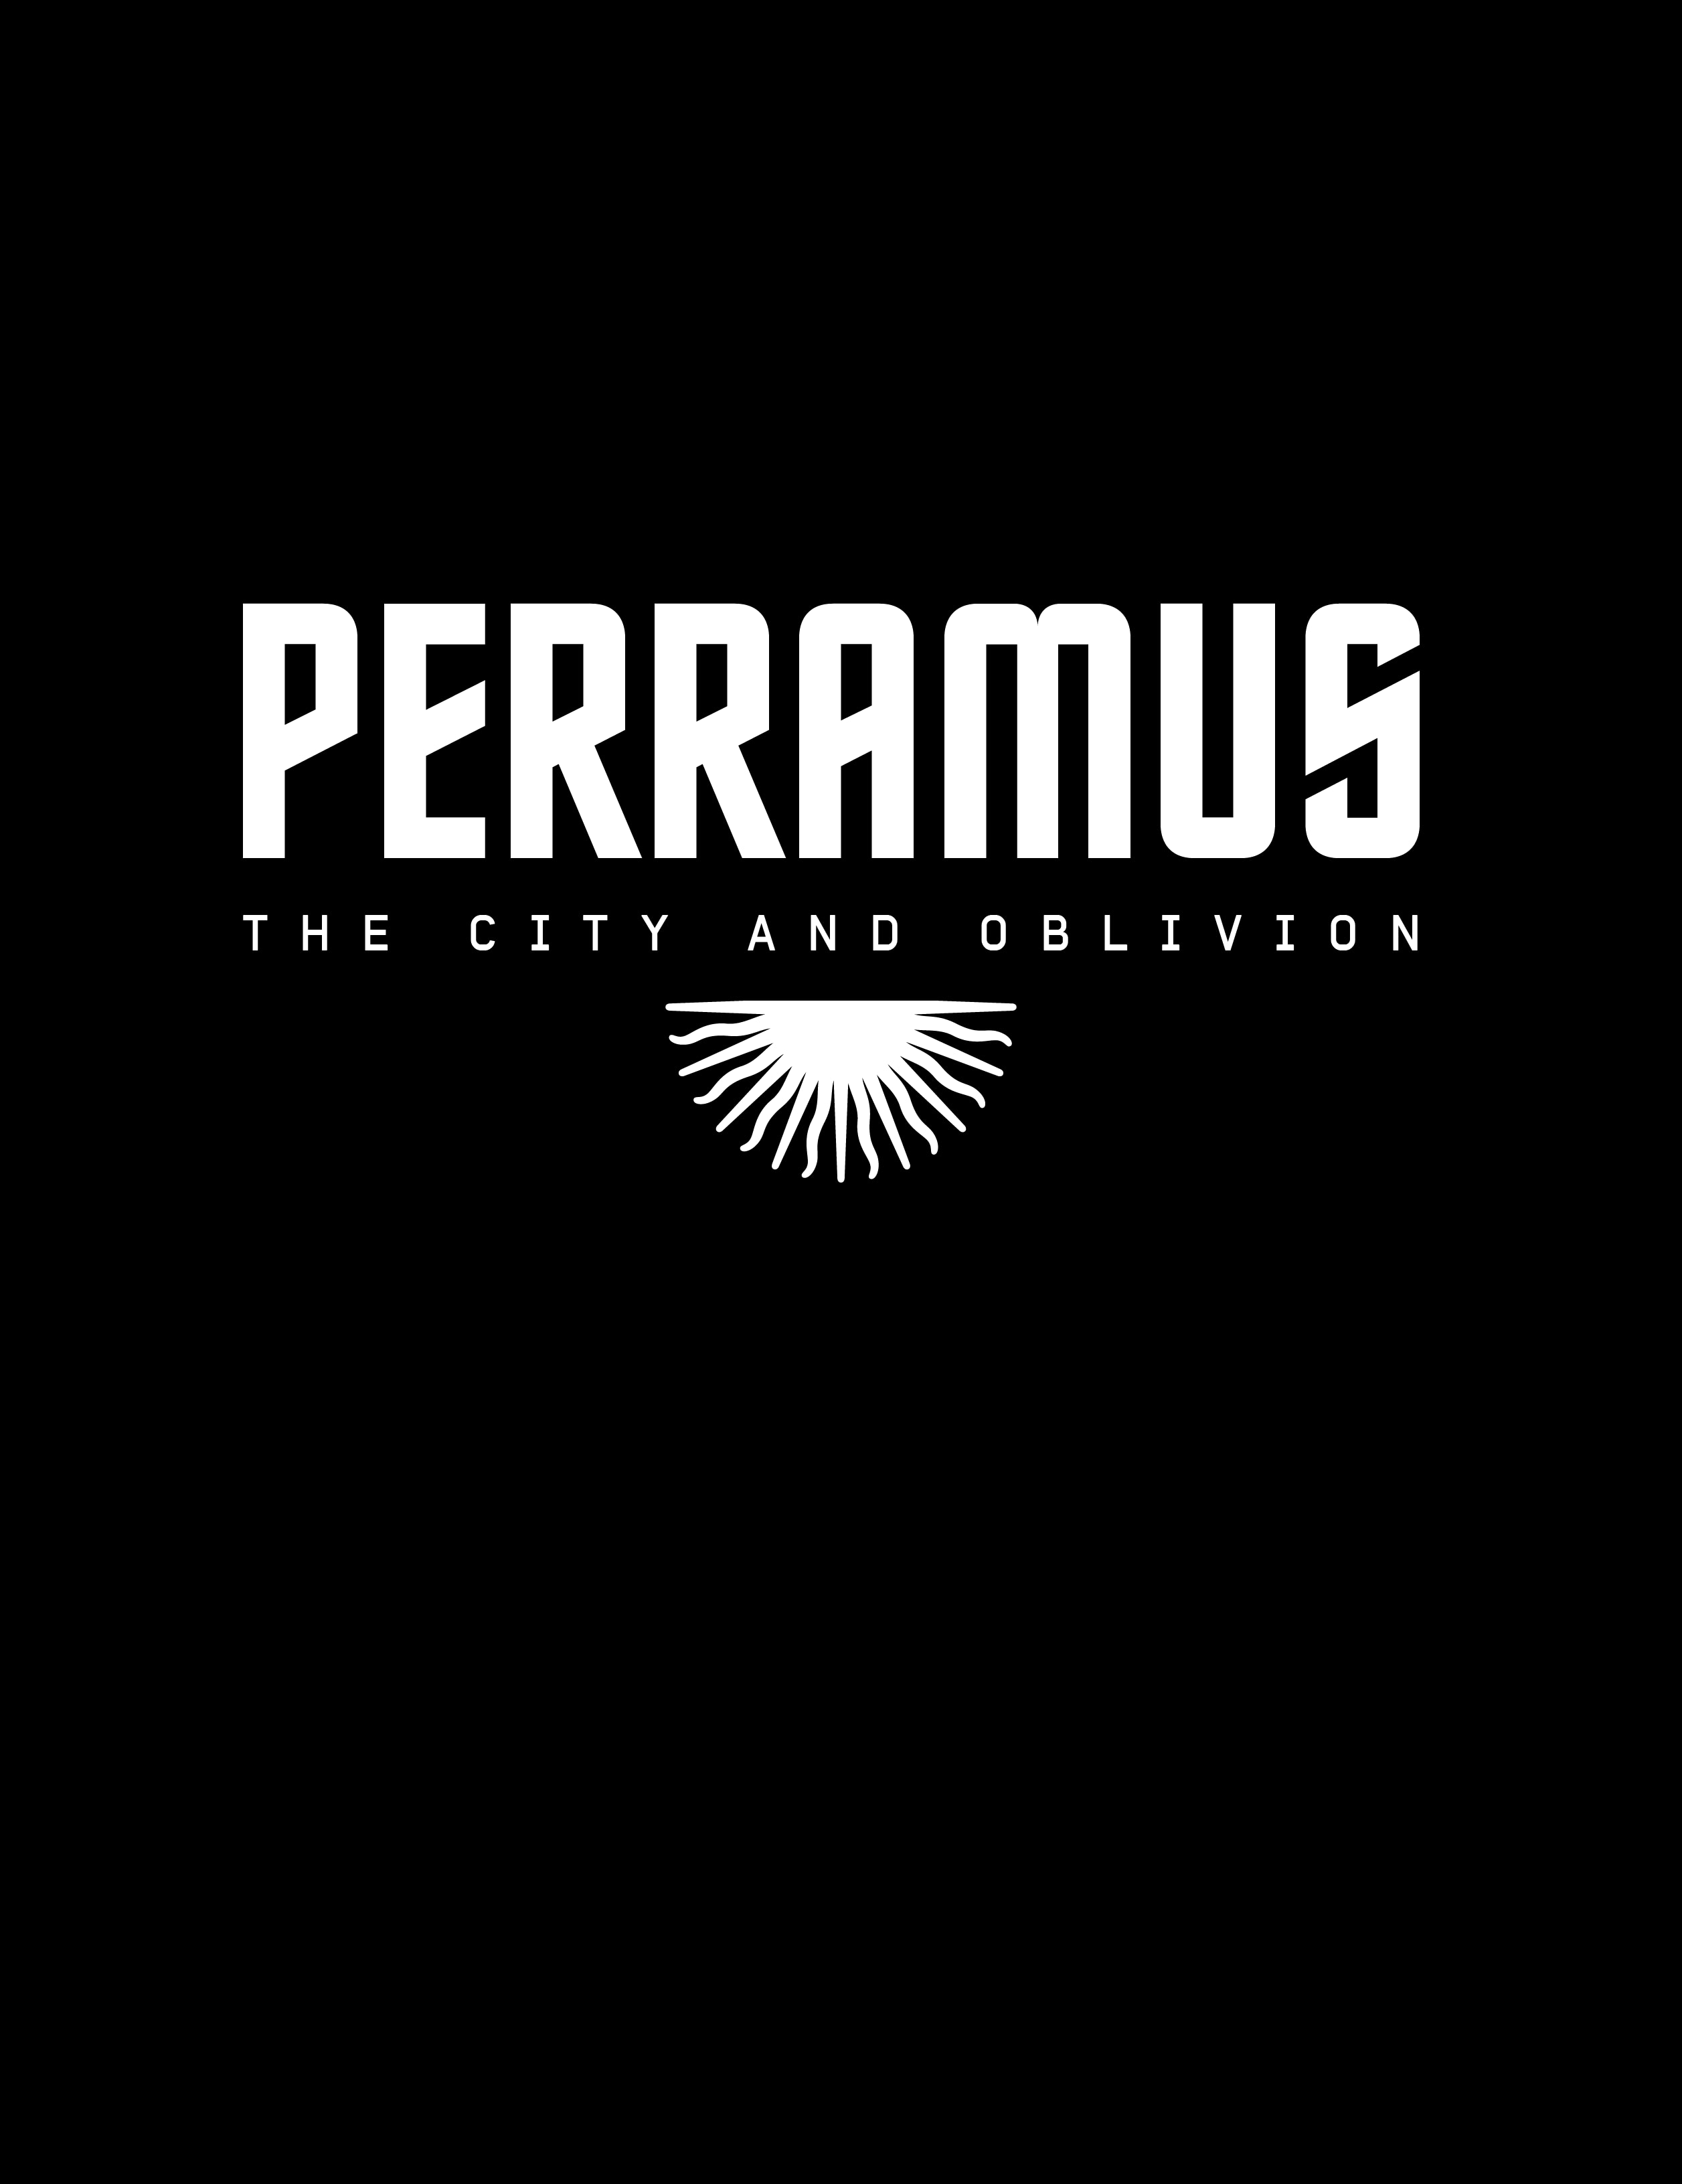 Read online Perramus: The City and Oblivion comic -  Issue # TPB (Part 1) - 6